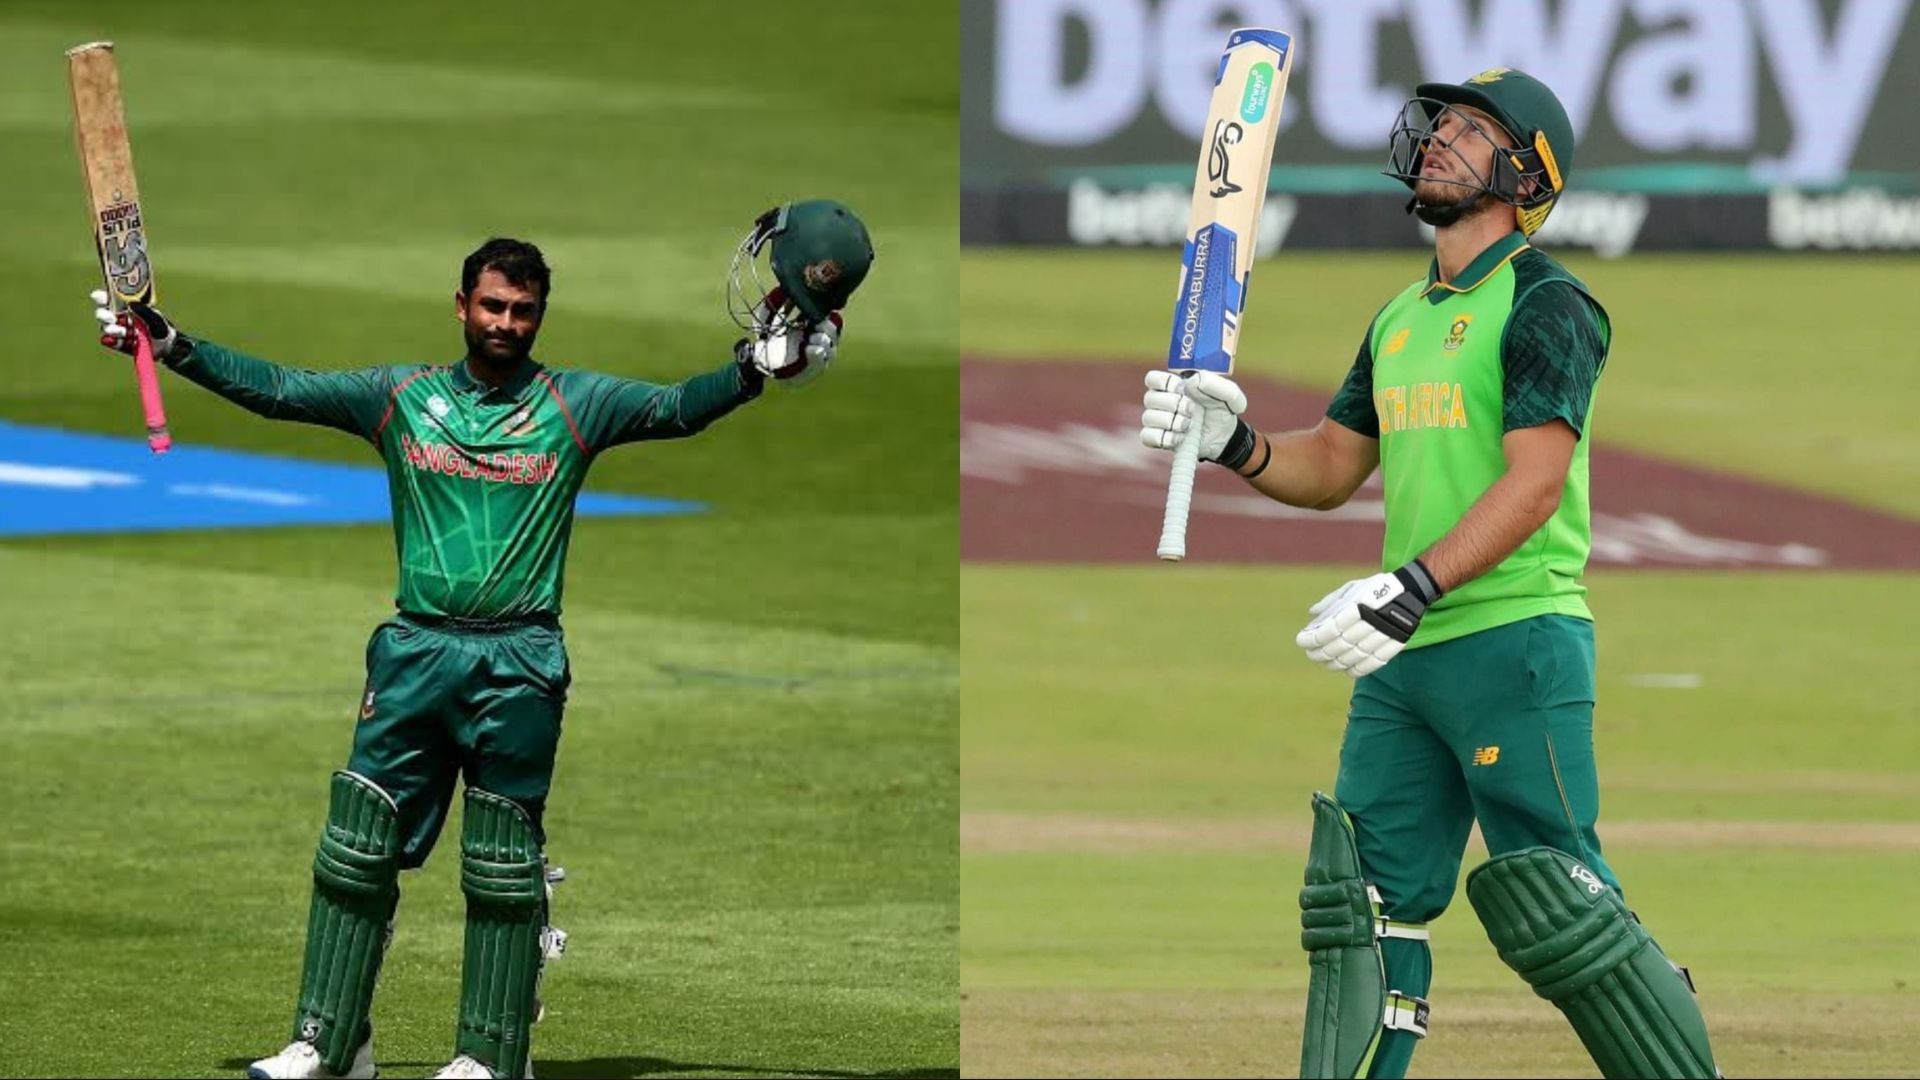 Tamim Iqbal and Janneman Malan performed brilliantly for their respective nations in ODI matches played this year